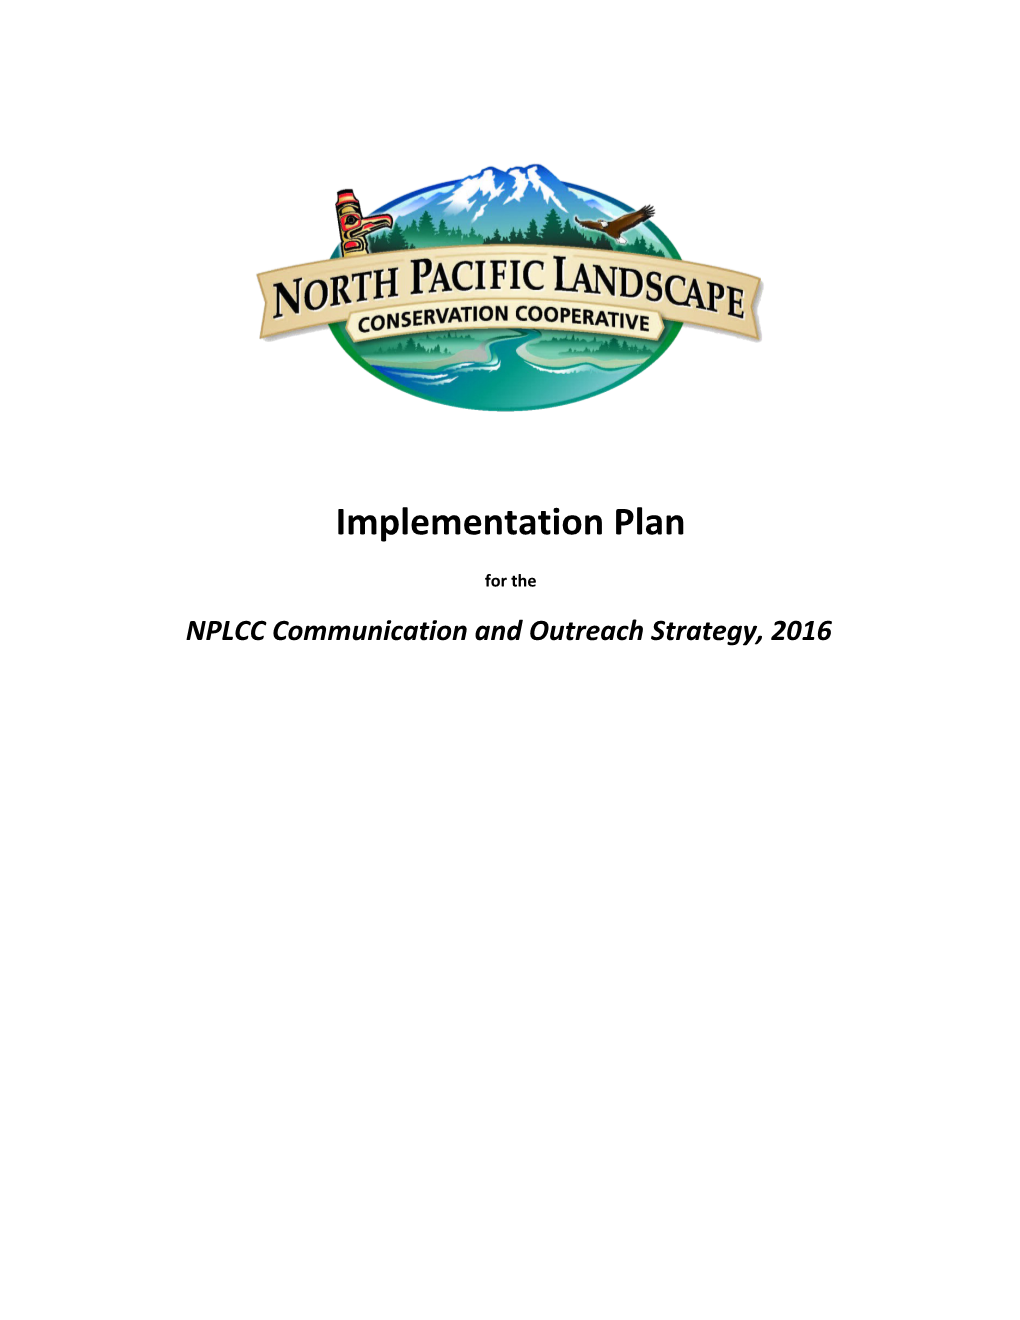 NPLCC Communication and Outreach Strategy, 2016